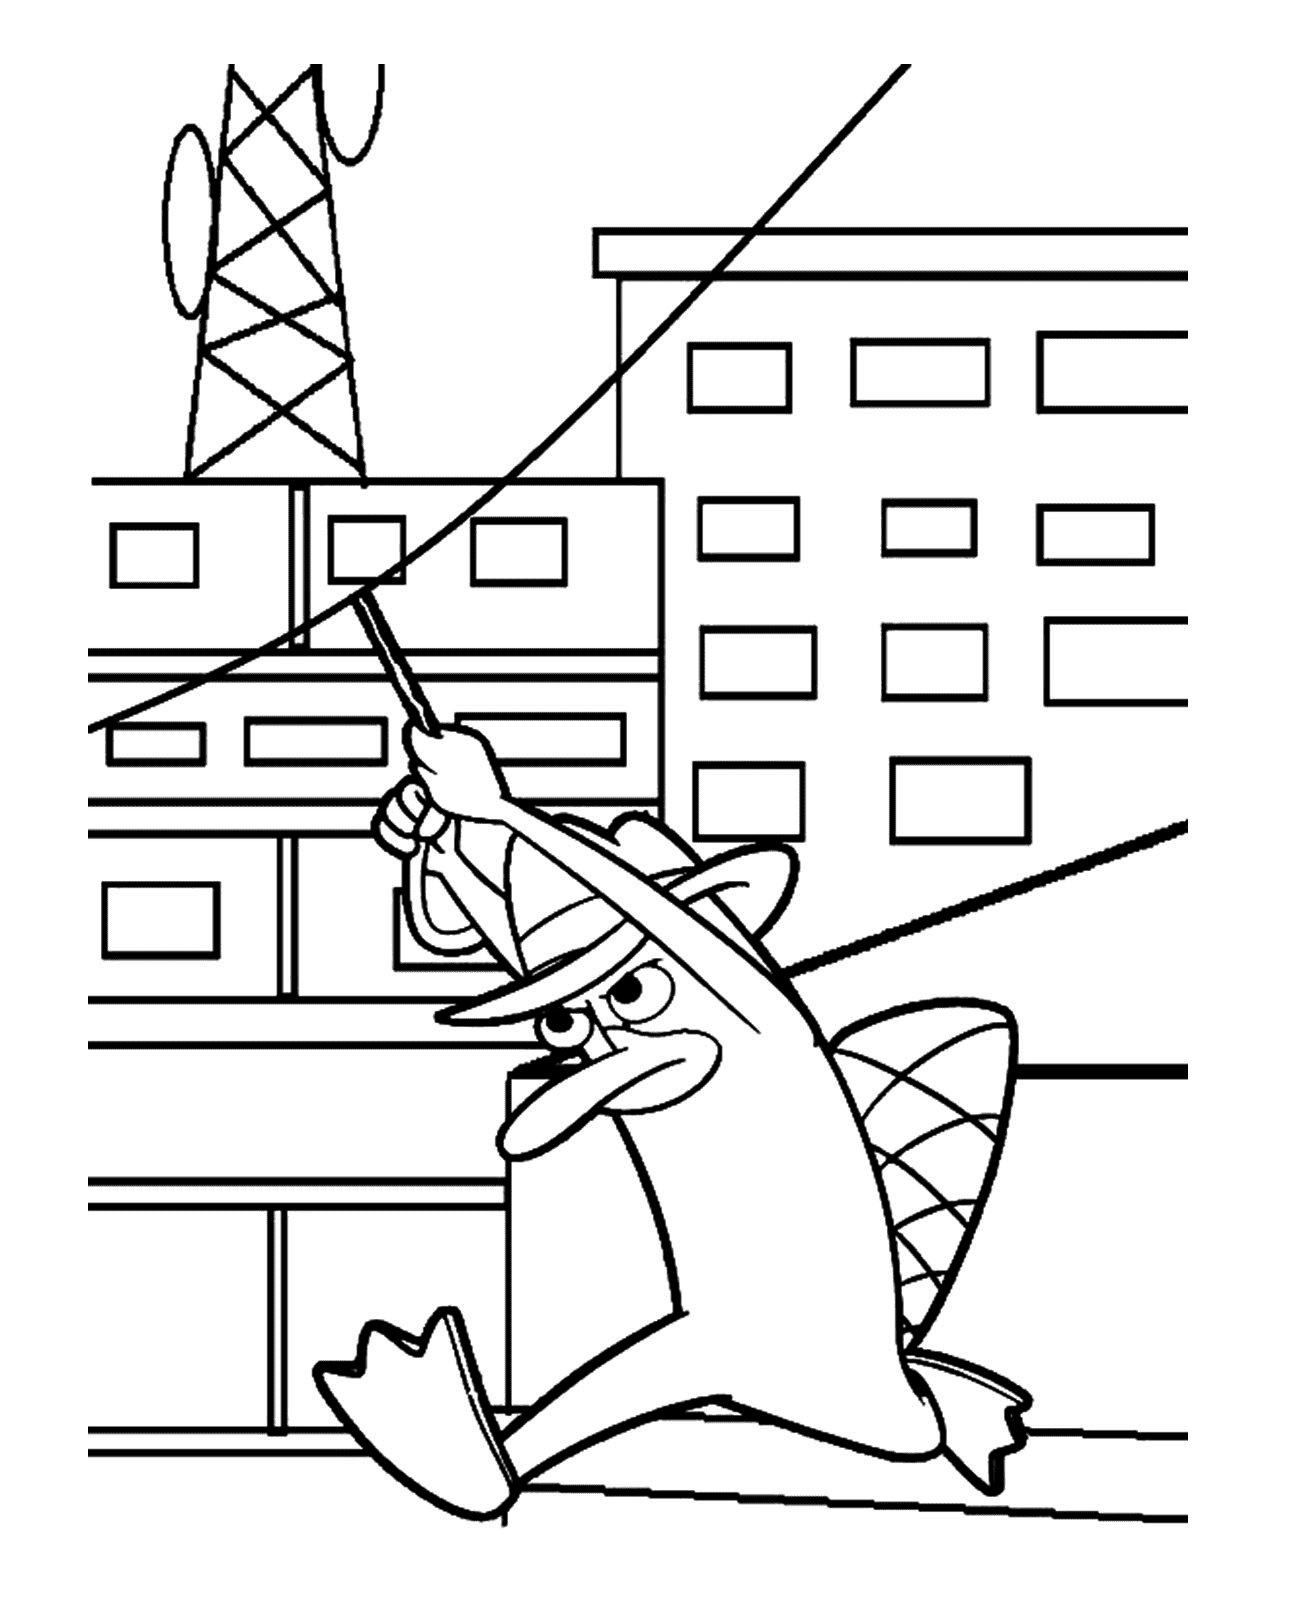 Perry Platypus Coloring Page - Free Printable Coloring Pages